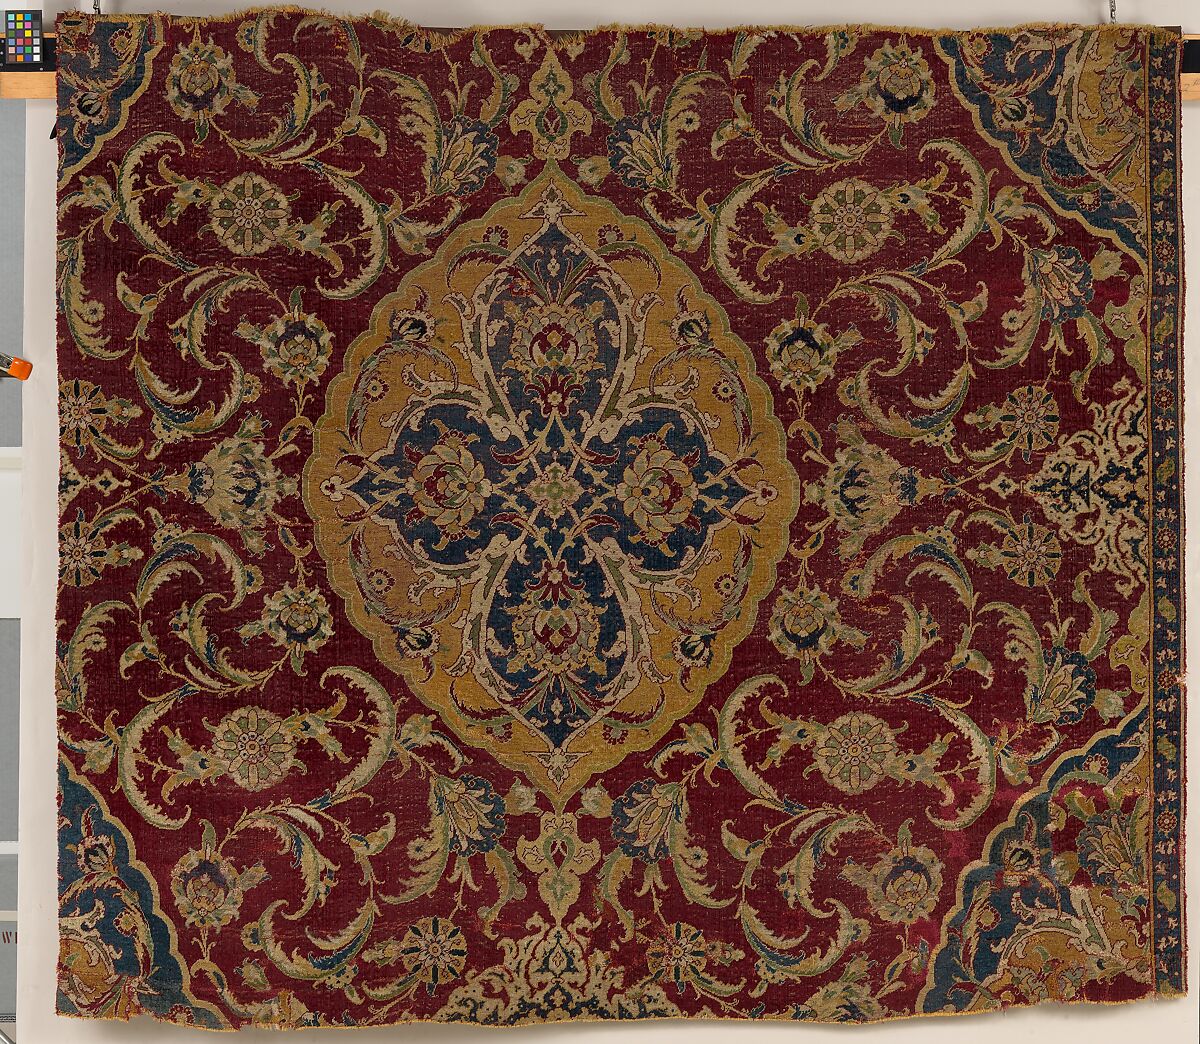 Fragment of an Ottoman Court Carpet, Wool (warp, weft, and pile); asymmetrically knotted pile 